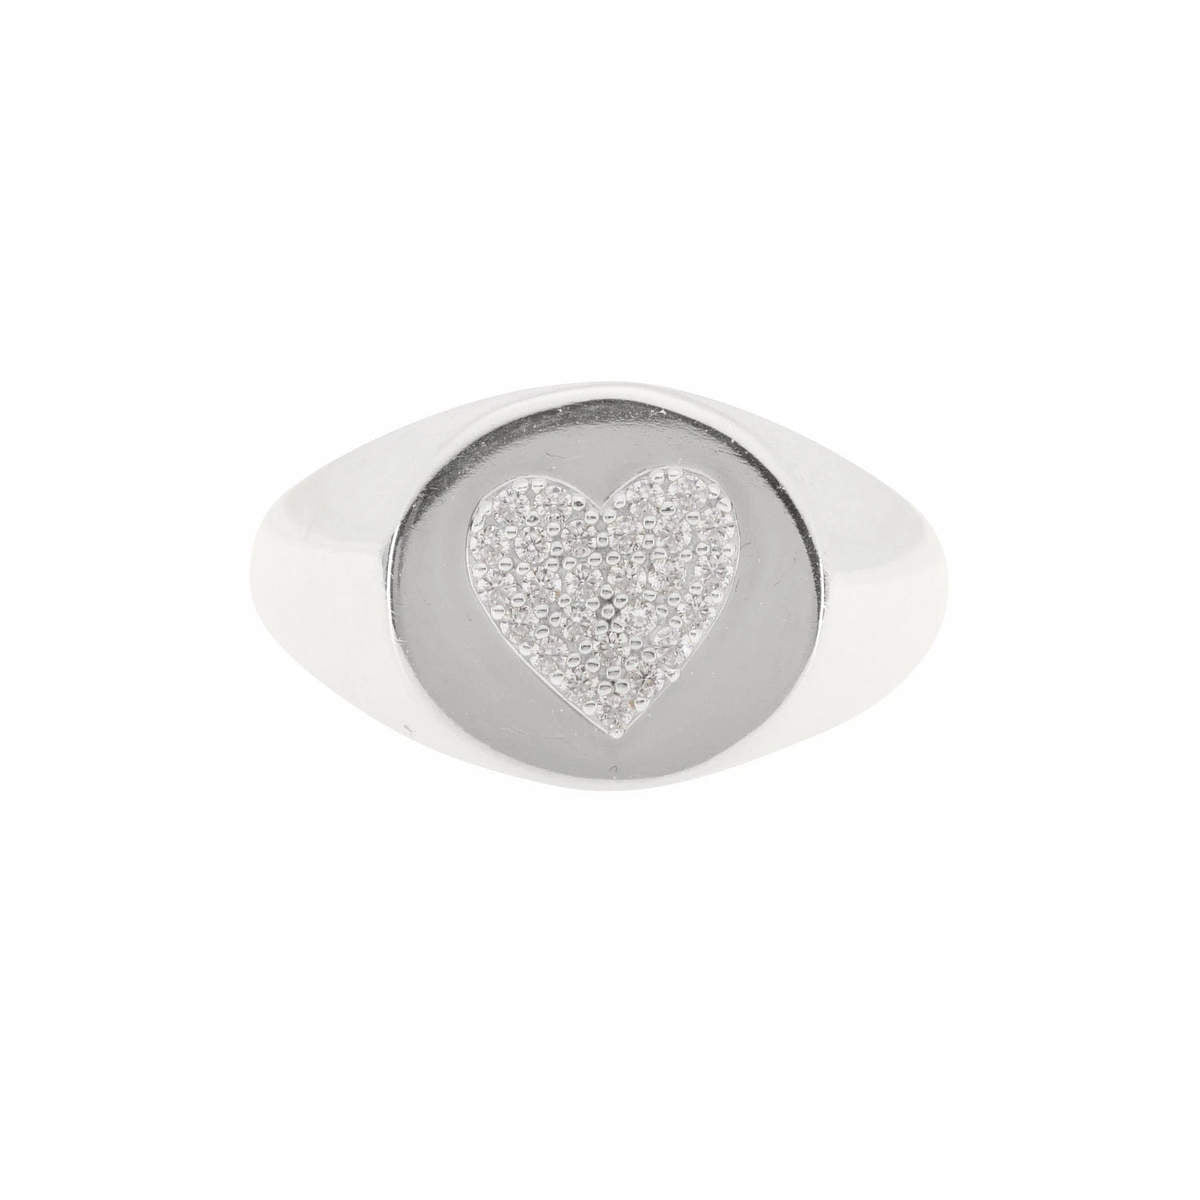 Sweetheart Signet Ring in Crystal